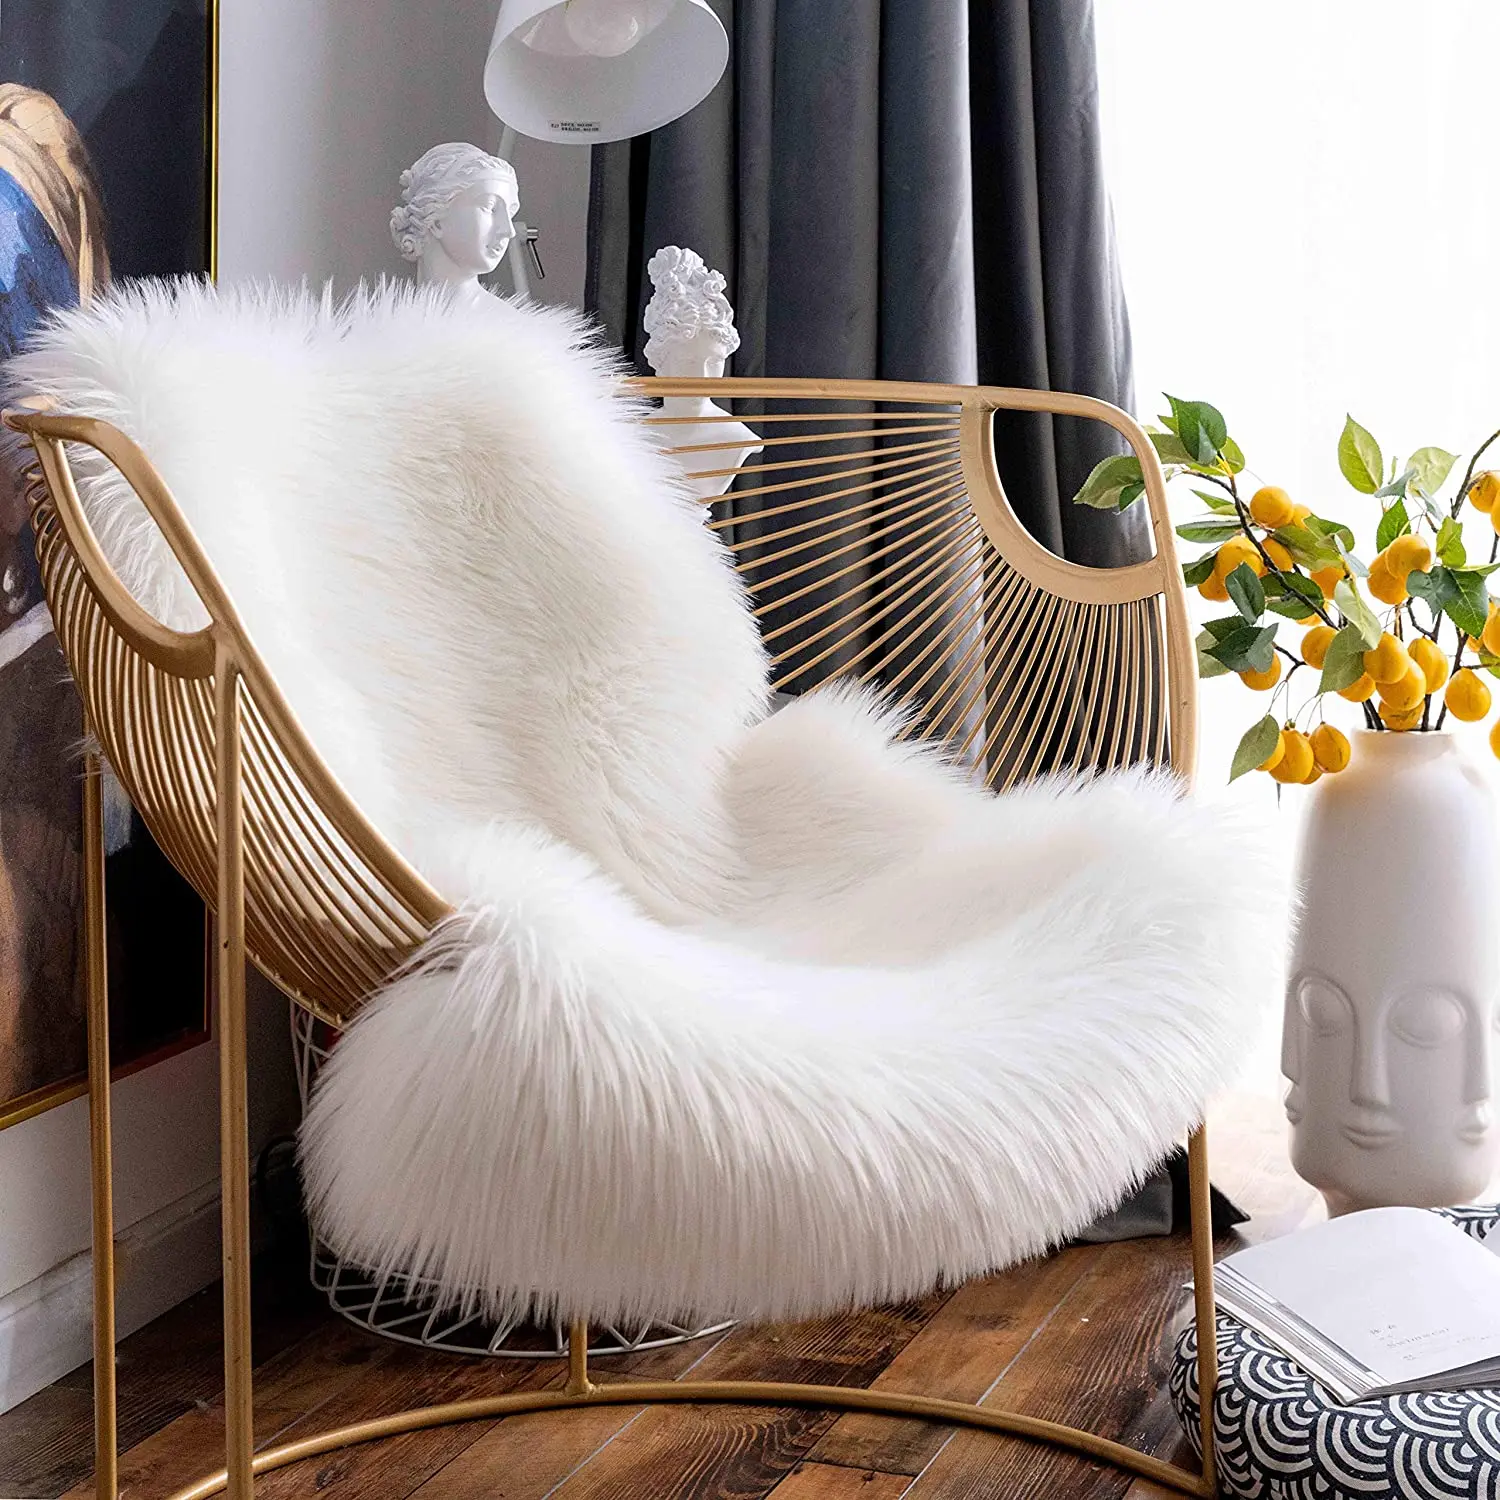 

Faux Fur Sheepskin Rugs Luxury Fluffy Rug Shaggy Home Decor Rug Chair Cover Seat Pad Couch Pad Area Carpet Fuzzy Throw Rug